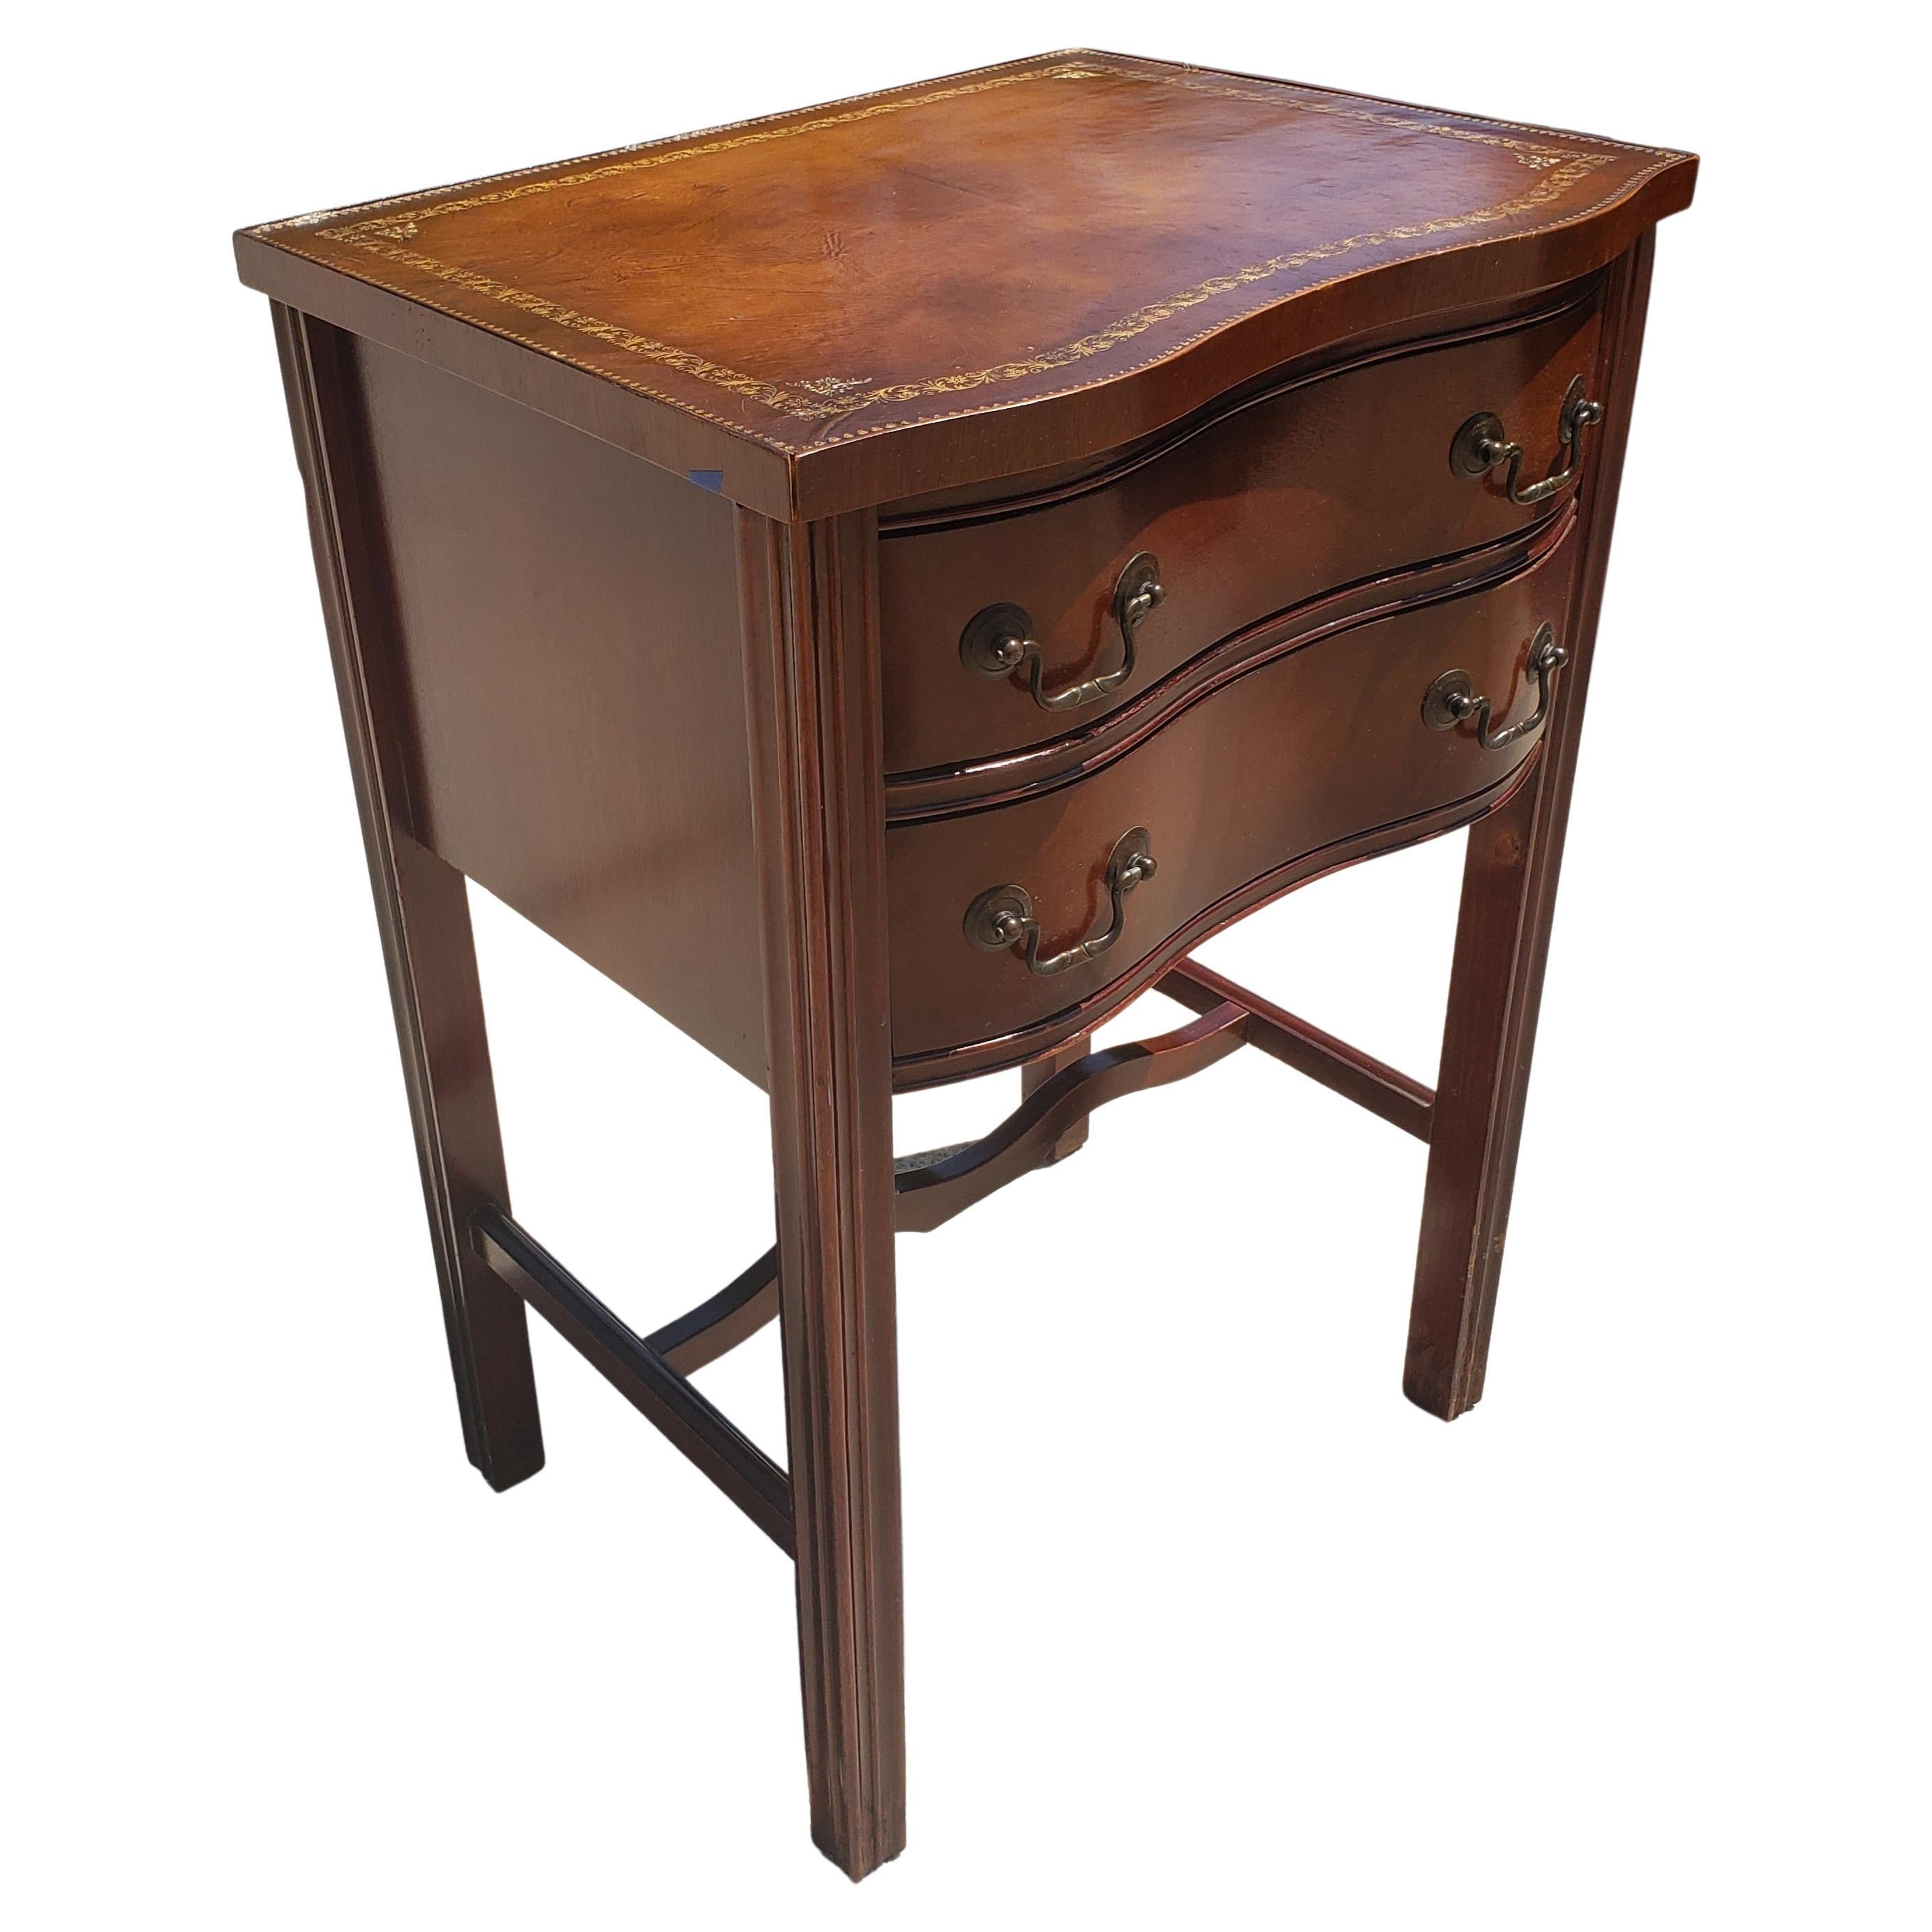 1940s Vintage Chippendale 2-drawer mahogany side table with Stinciled leather top. Good vintage condition with age patina on leather. 
Measures 19